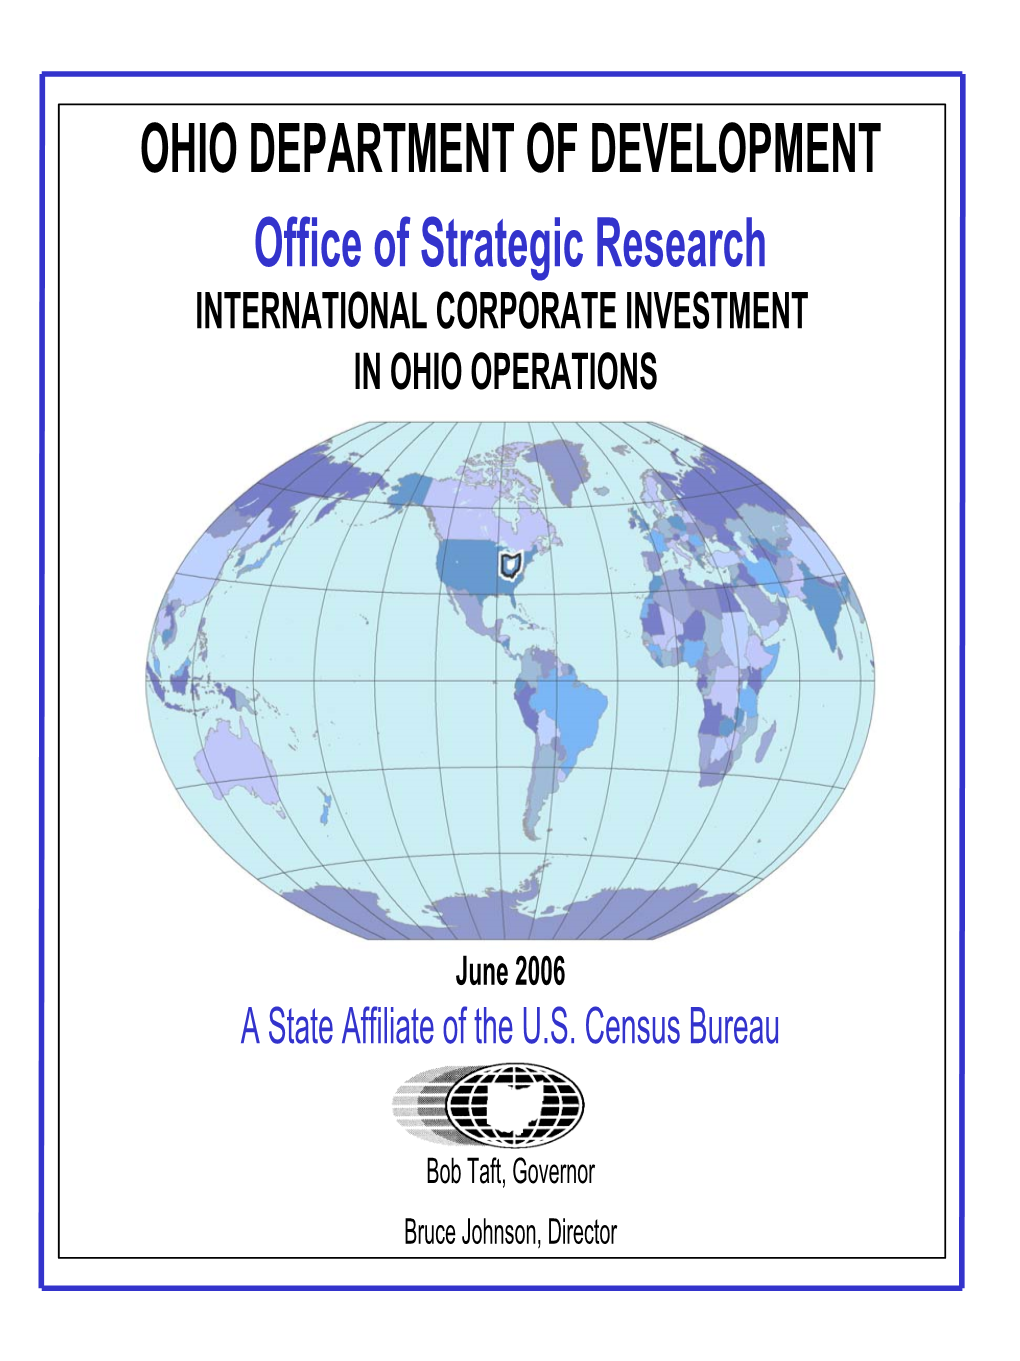 Office of Strategic Research INTERNATIONAL CORPORATE INVESTMENT in OHIO OPERATIONS